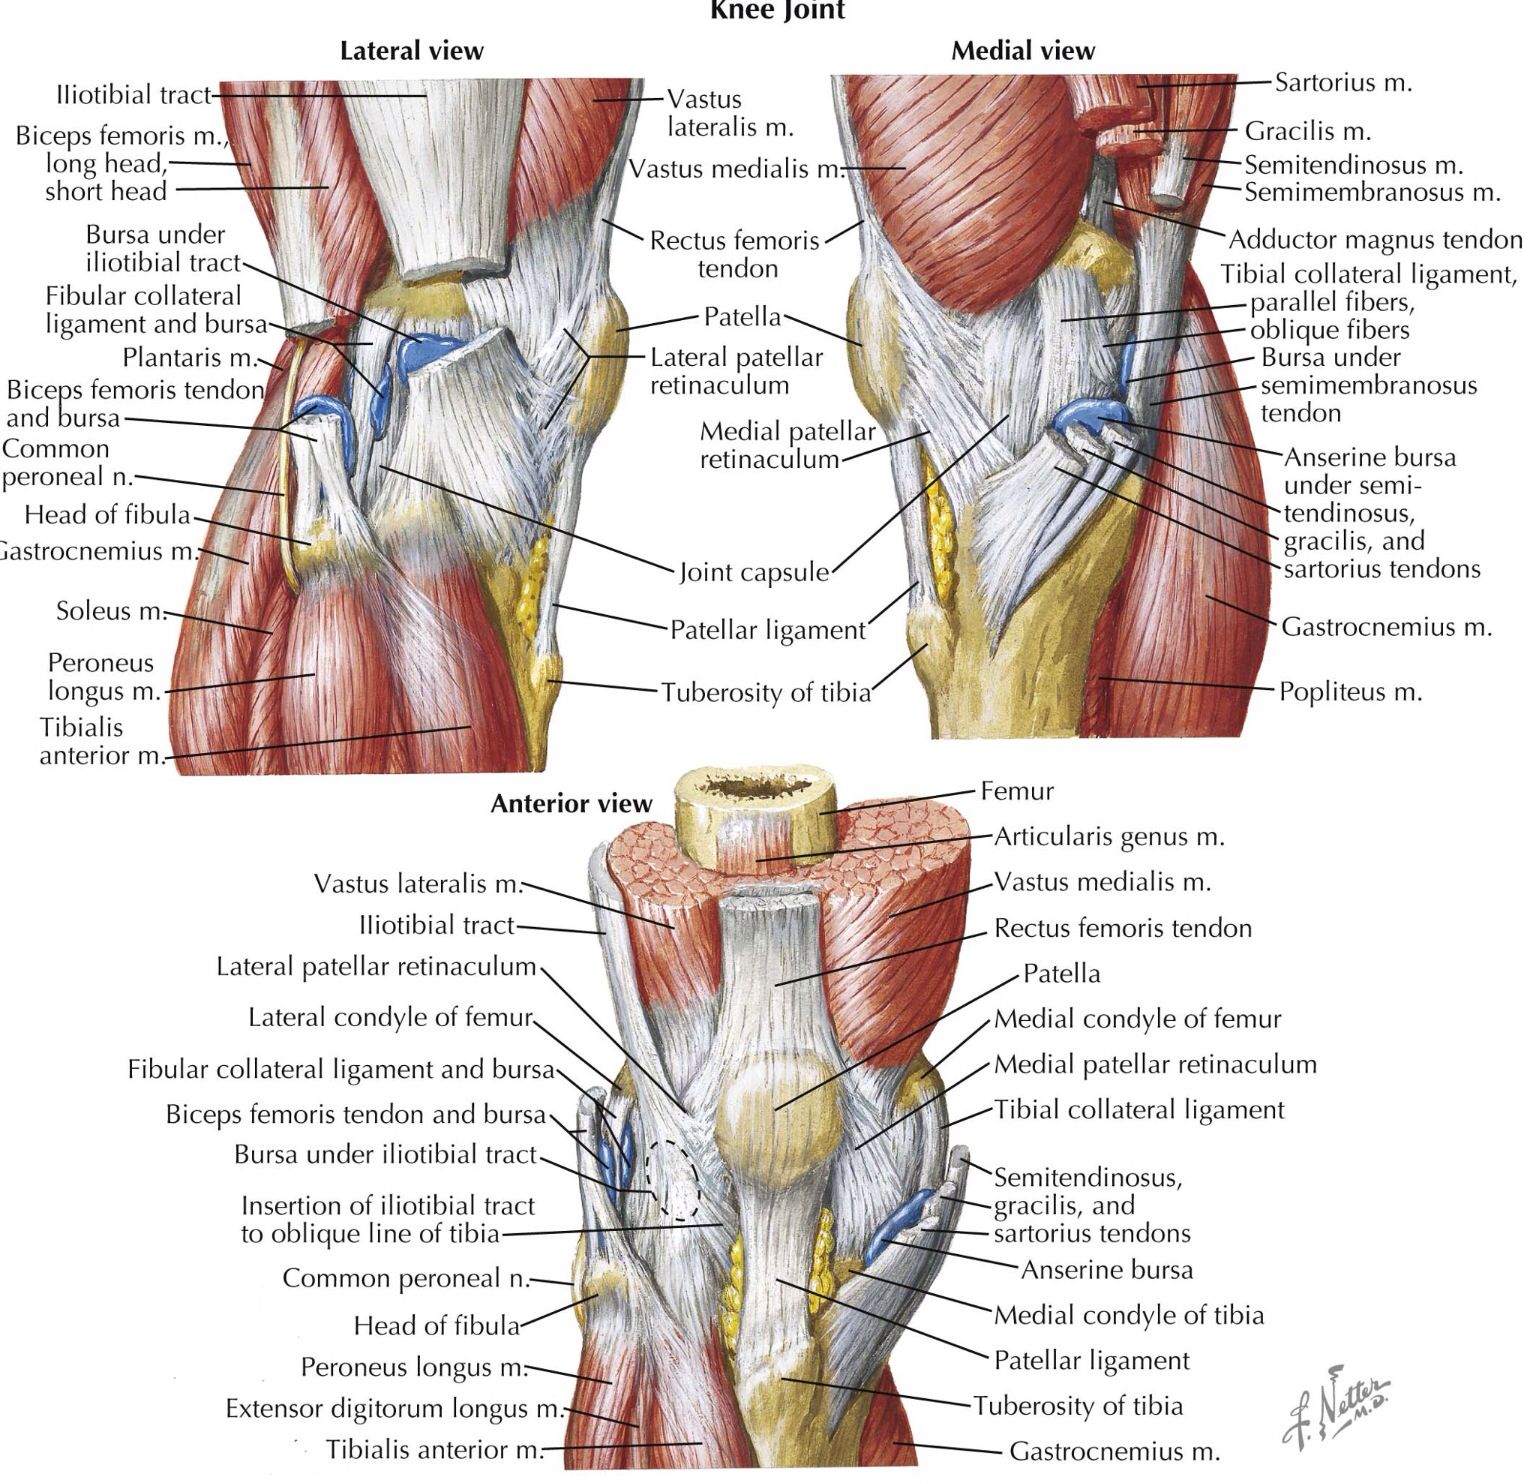 Multiple aspects of the knee